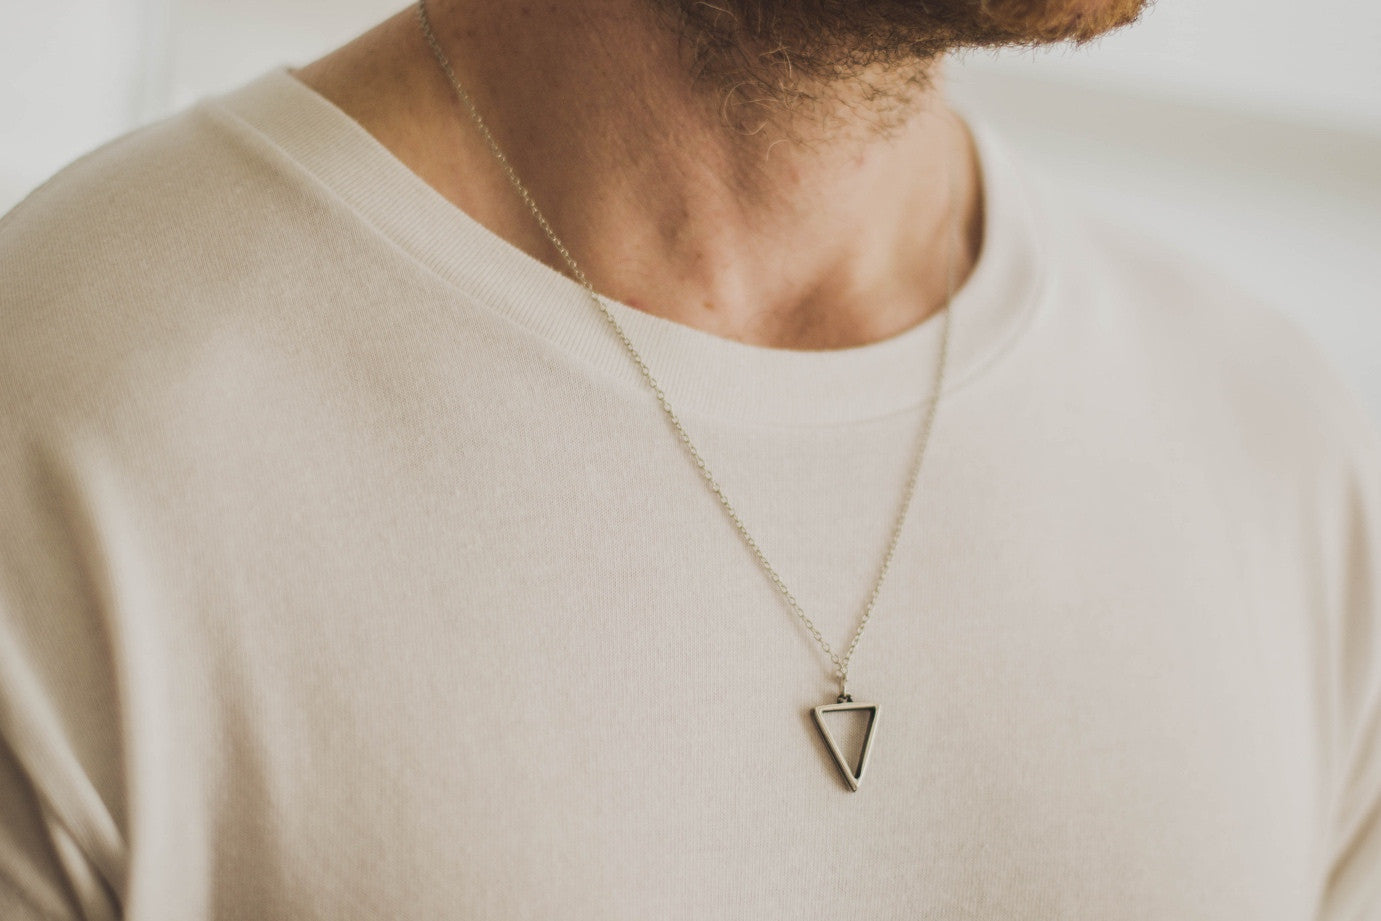 Buy Triangle Necklace for Men, Groomsmen Gift, Men's Necklace With a Gold  Tone Triangle Pendant, Gold Chain, Gift for Him, Geometric Necklace Online  in India - Etsy